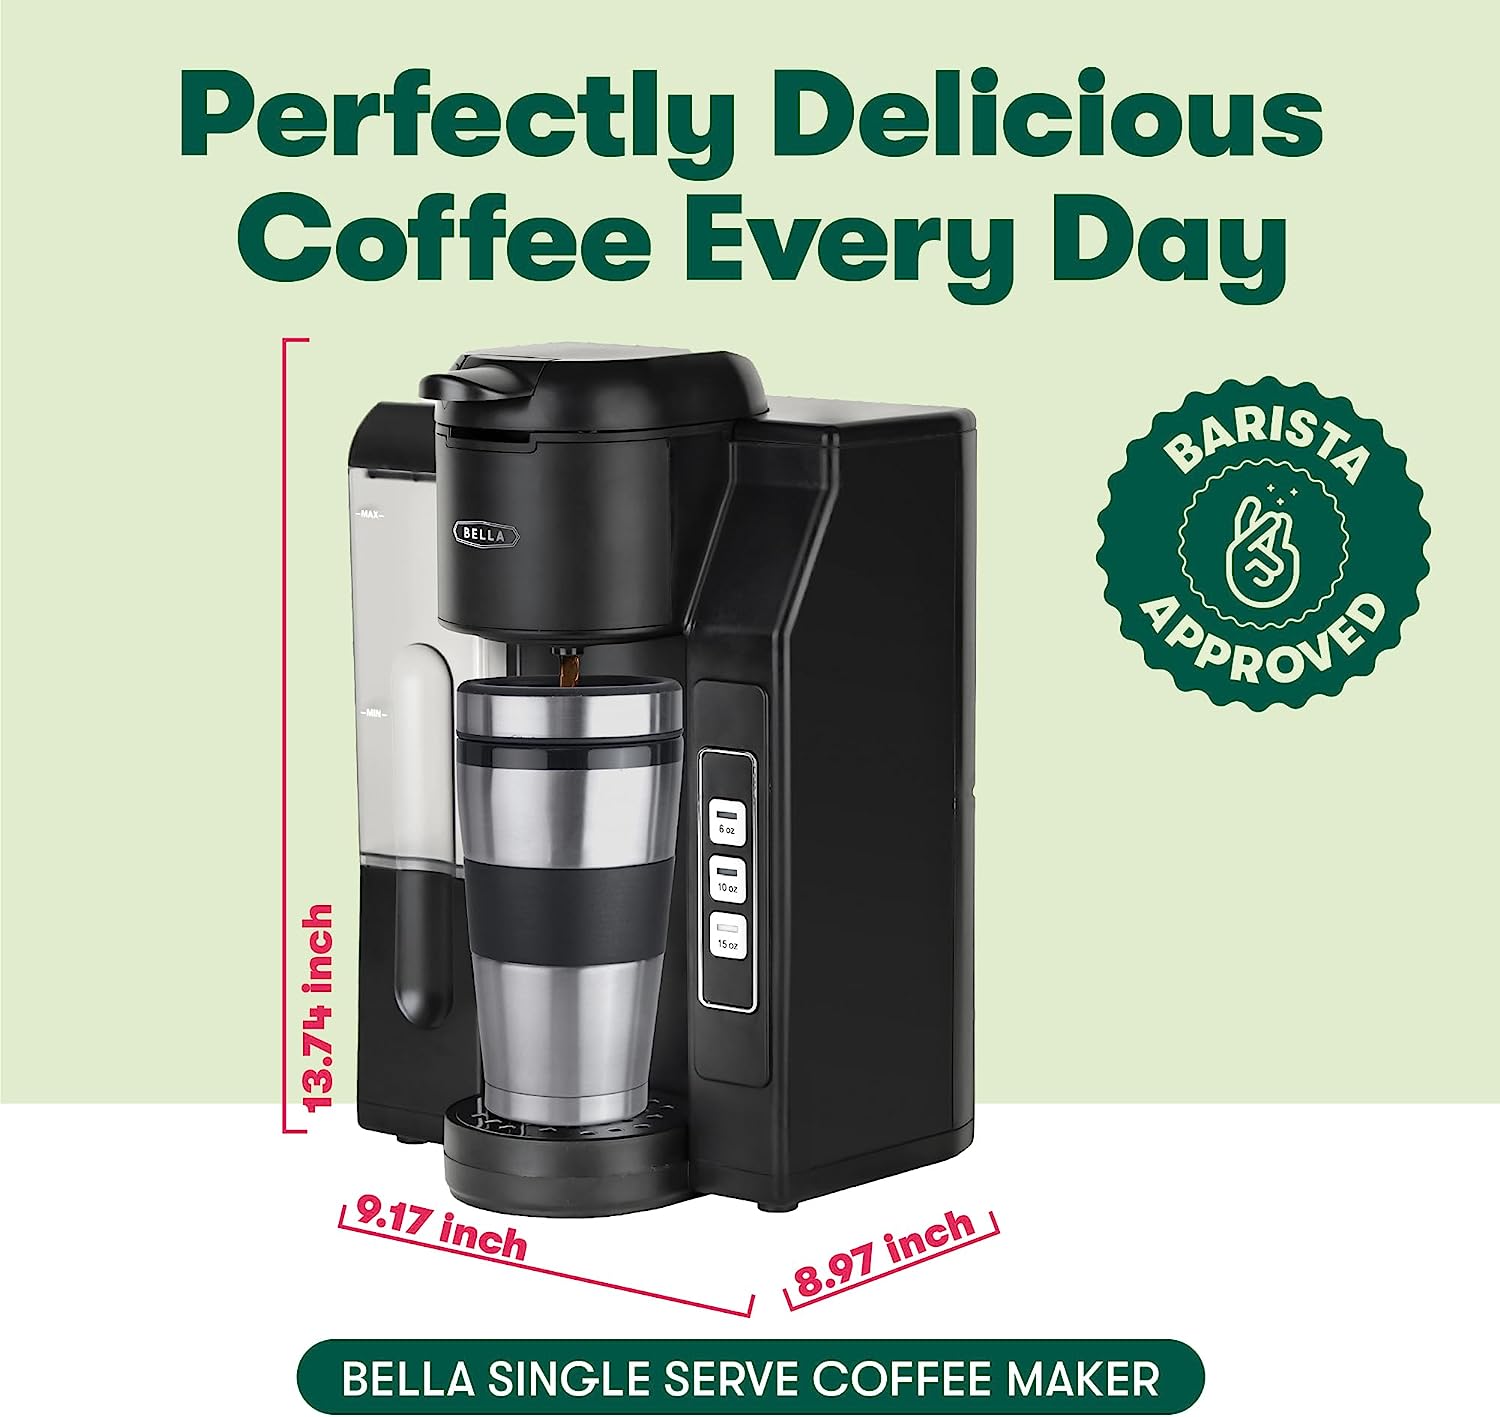 Sold at Auction: New Bella Dual Brew Single Serve Coffee Maker